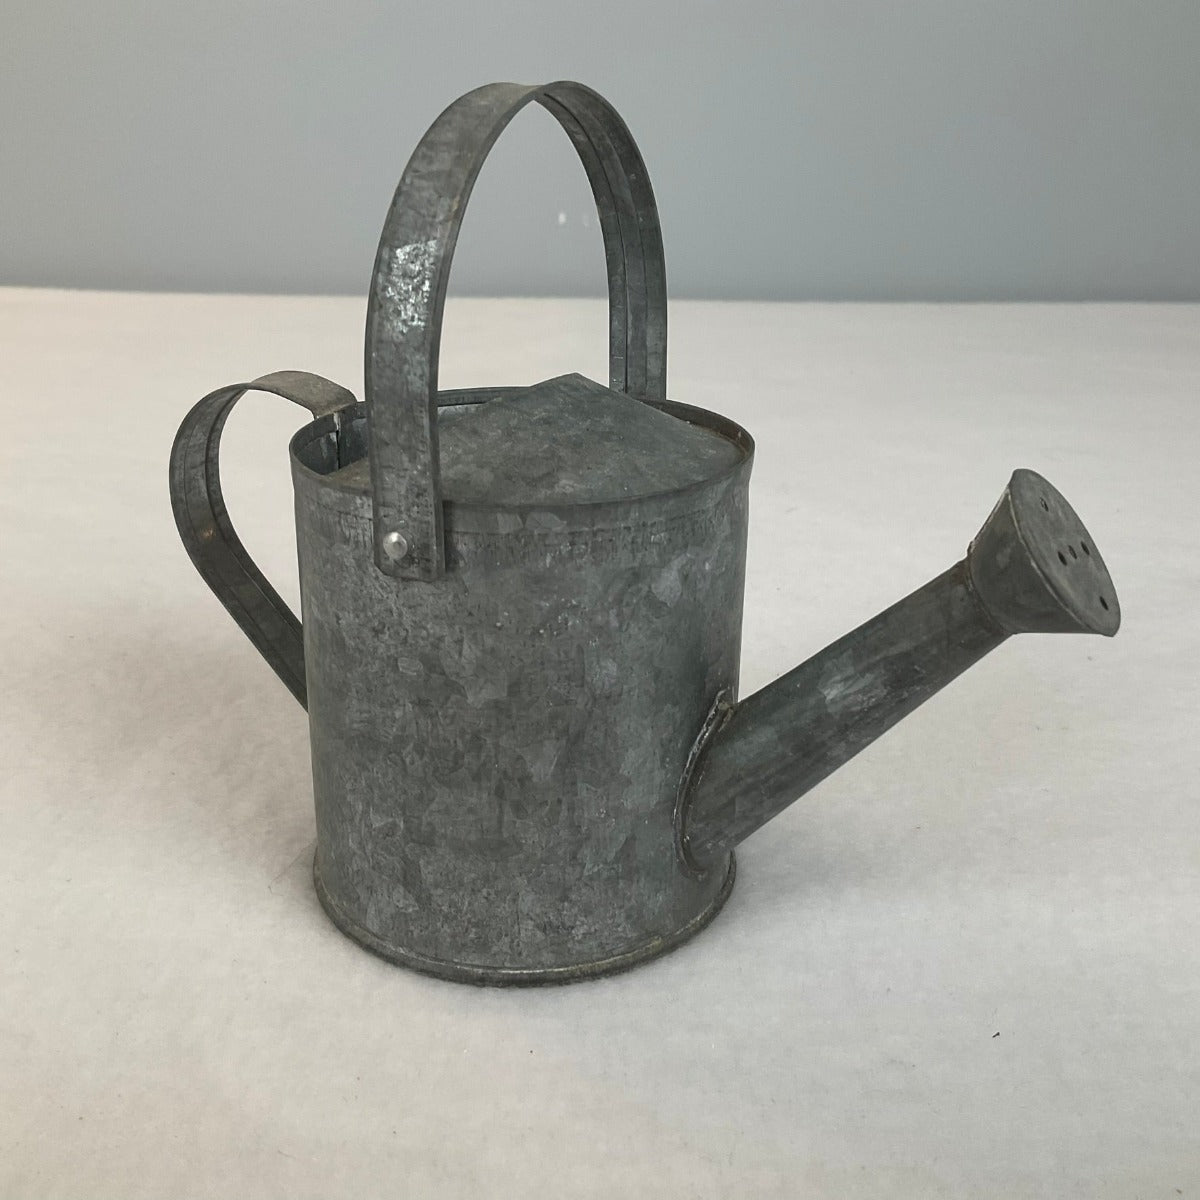 Mini Galvanized Watering Can - Handle Up